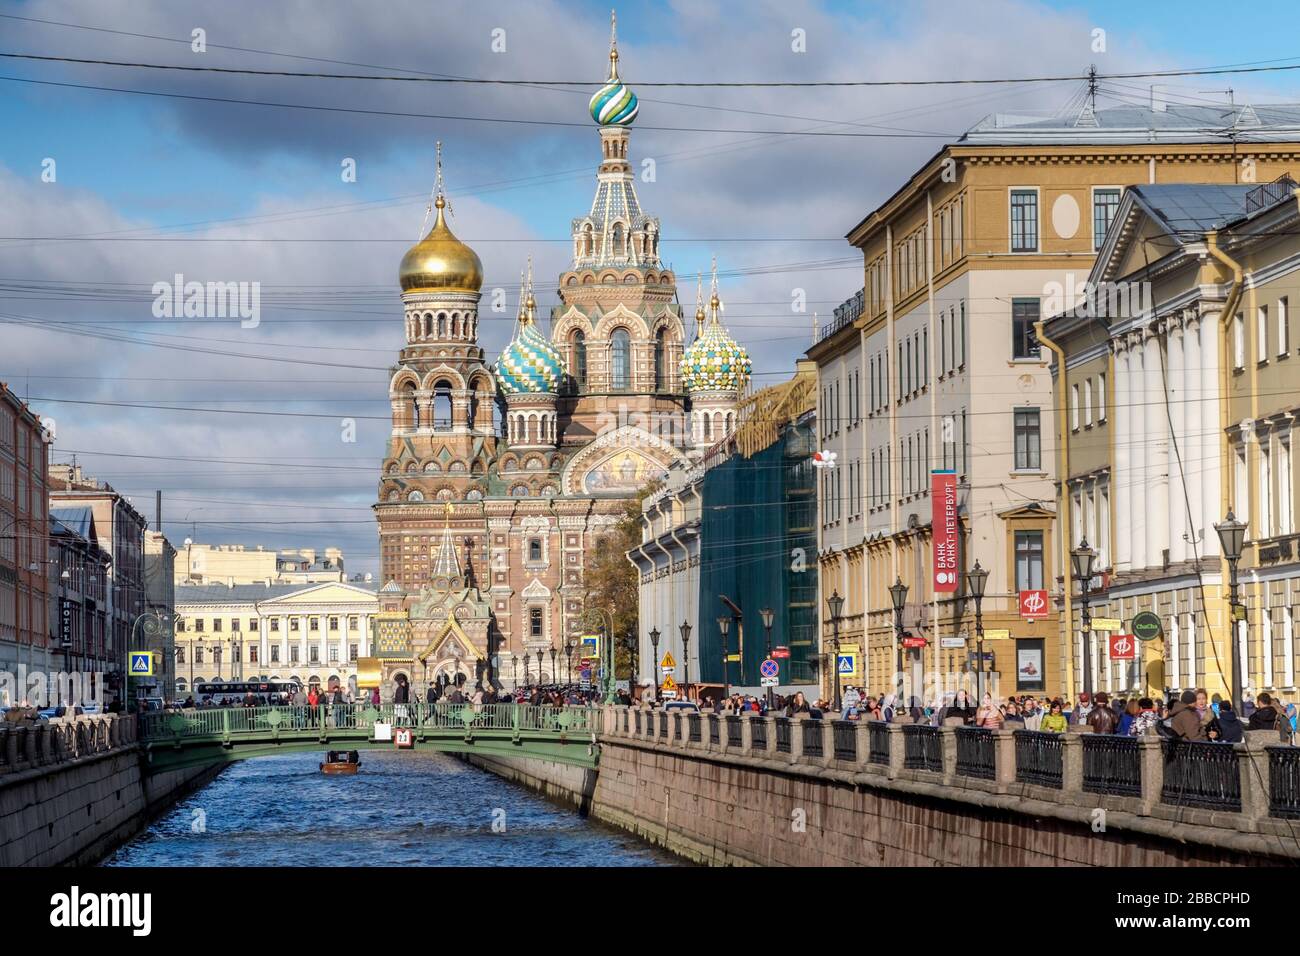 The Church of the Savior on Spilled Blood and Italian bridge over Griboedov channel, St Petersburg Russia Stock Photo